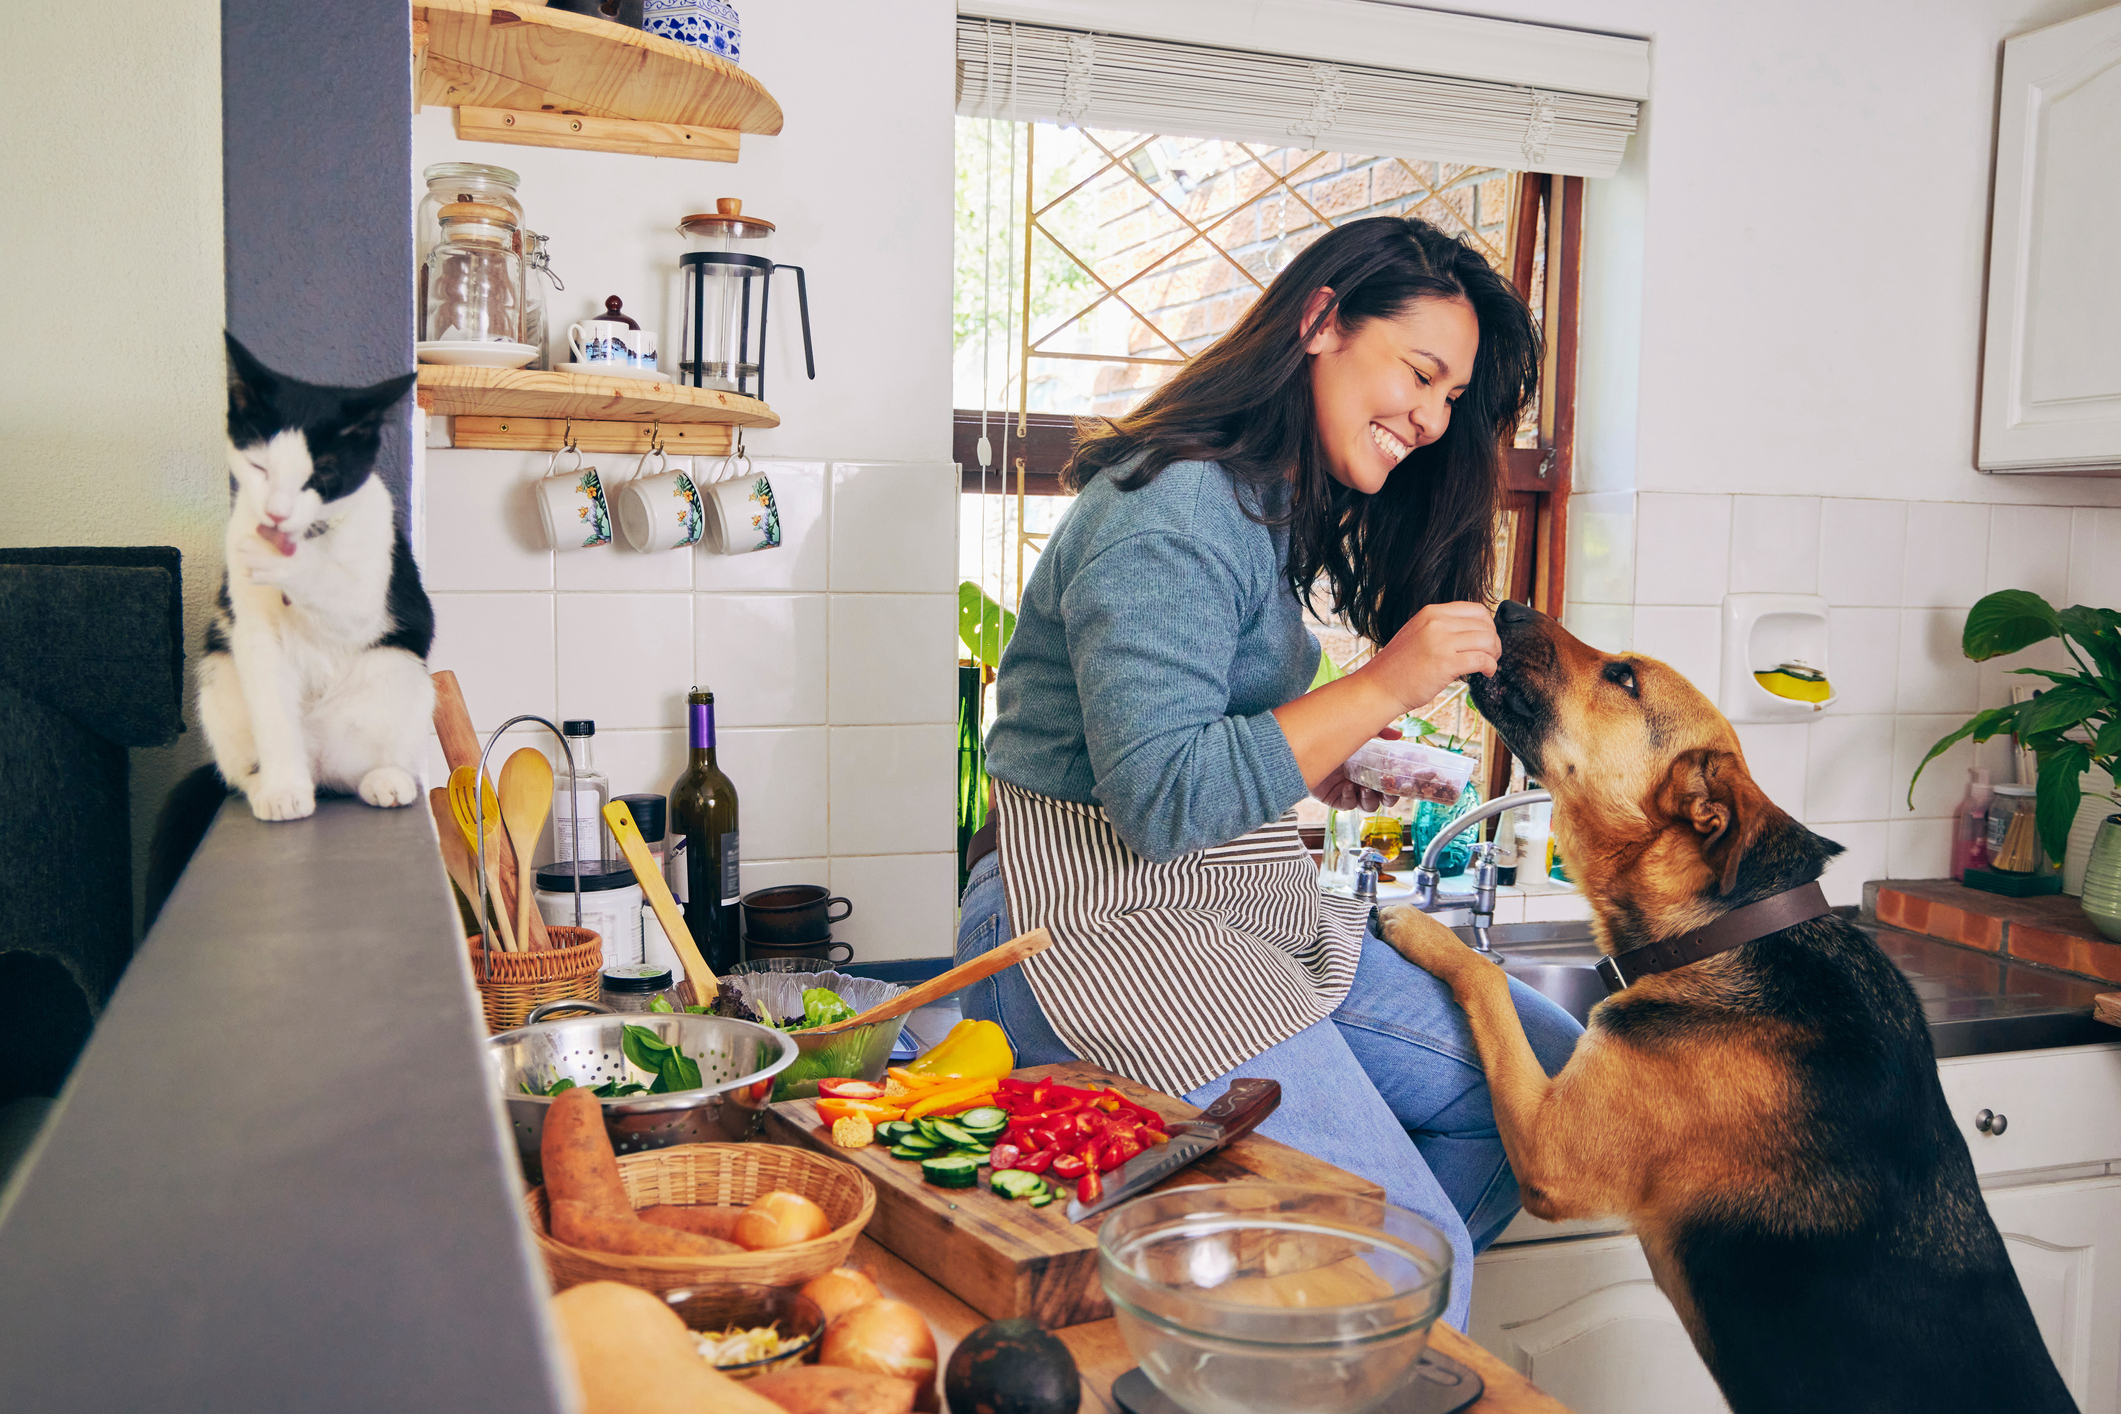 Smiling woman in kitchen with dog and cat tasting fresh veggies, herbs and spices